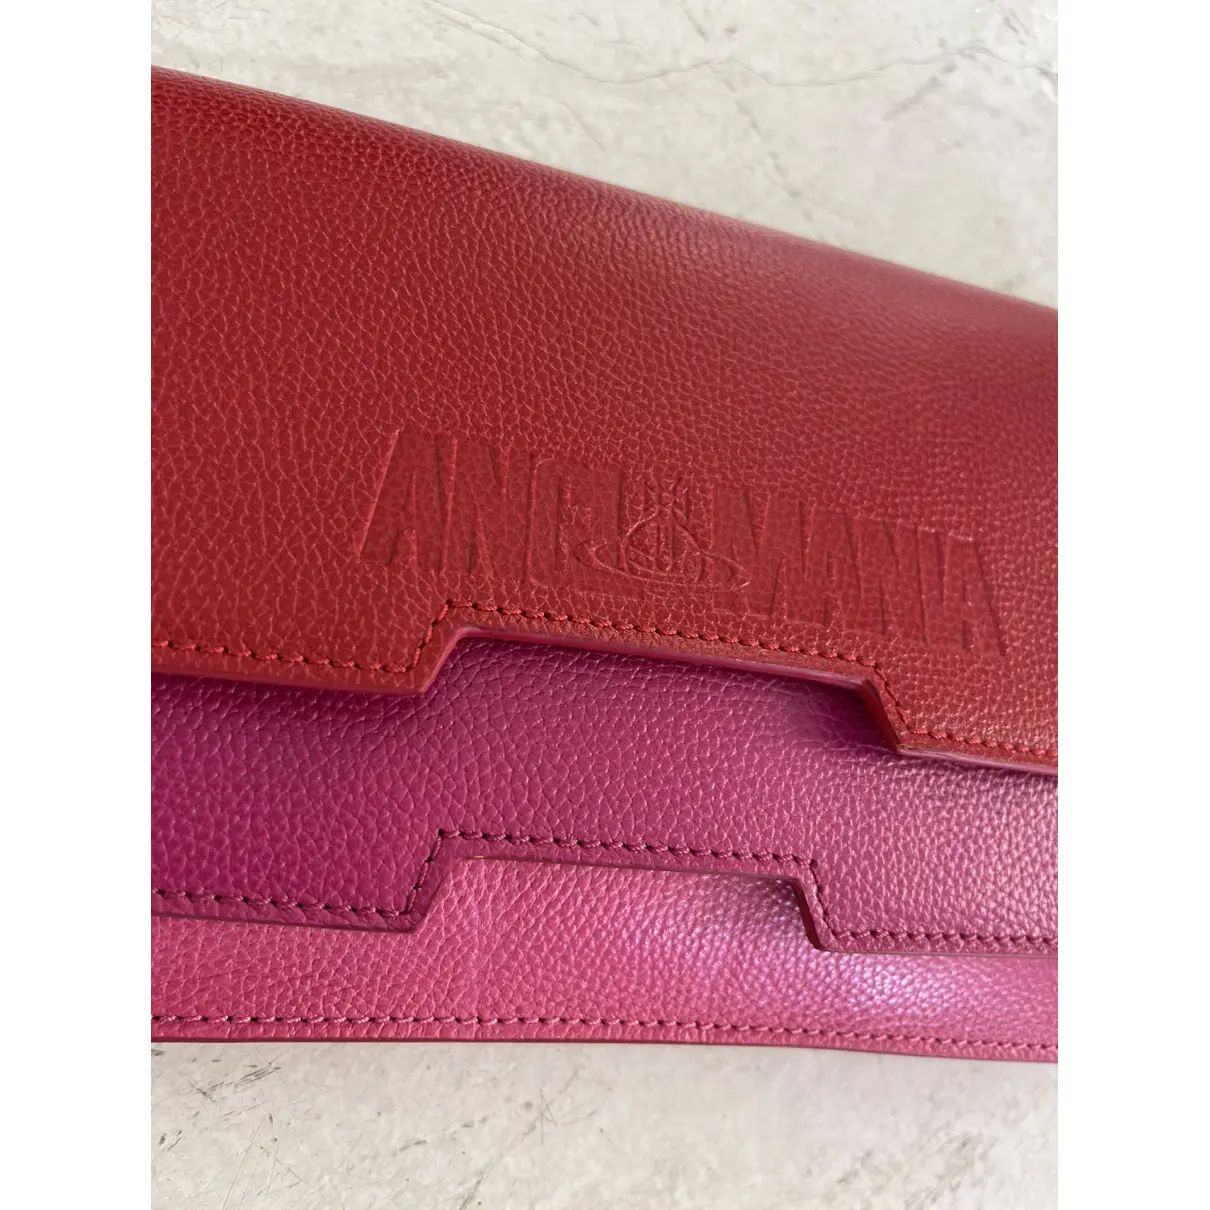 Leather clutch bag Vivienne Westwood Anglomania